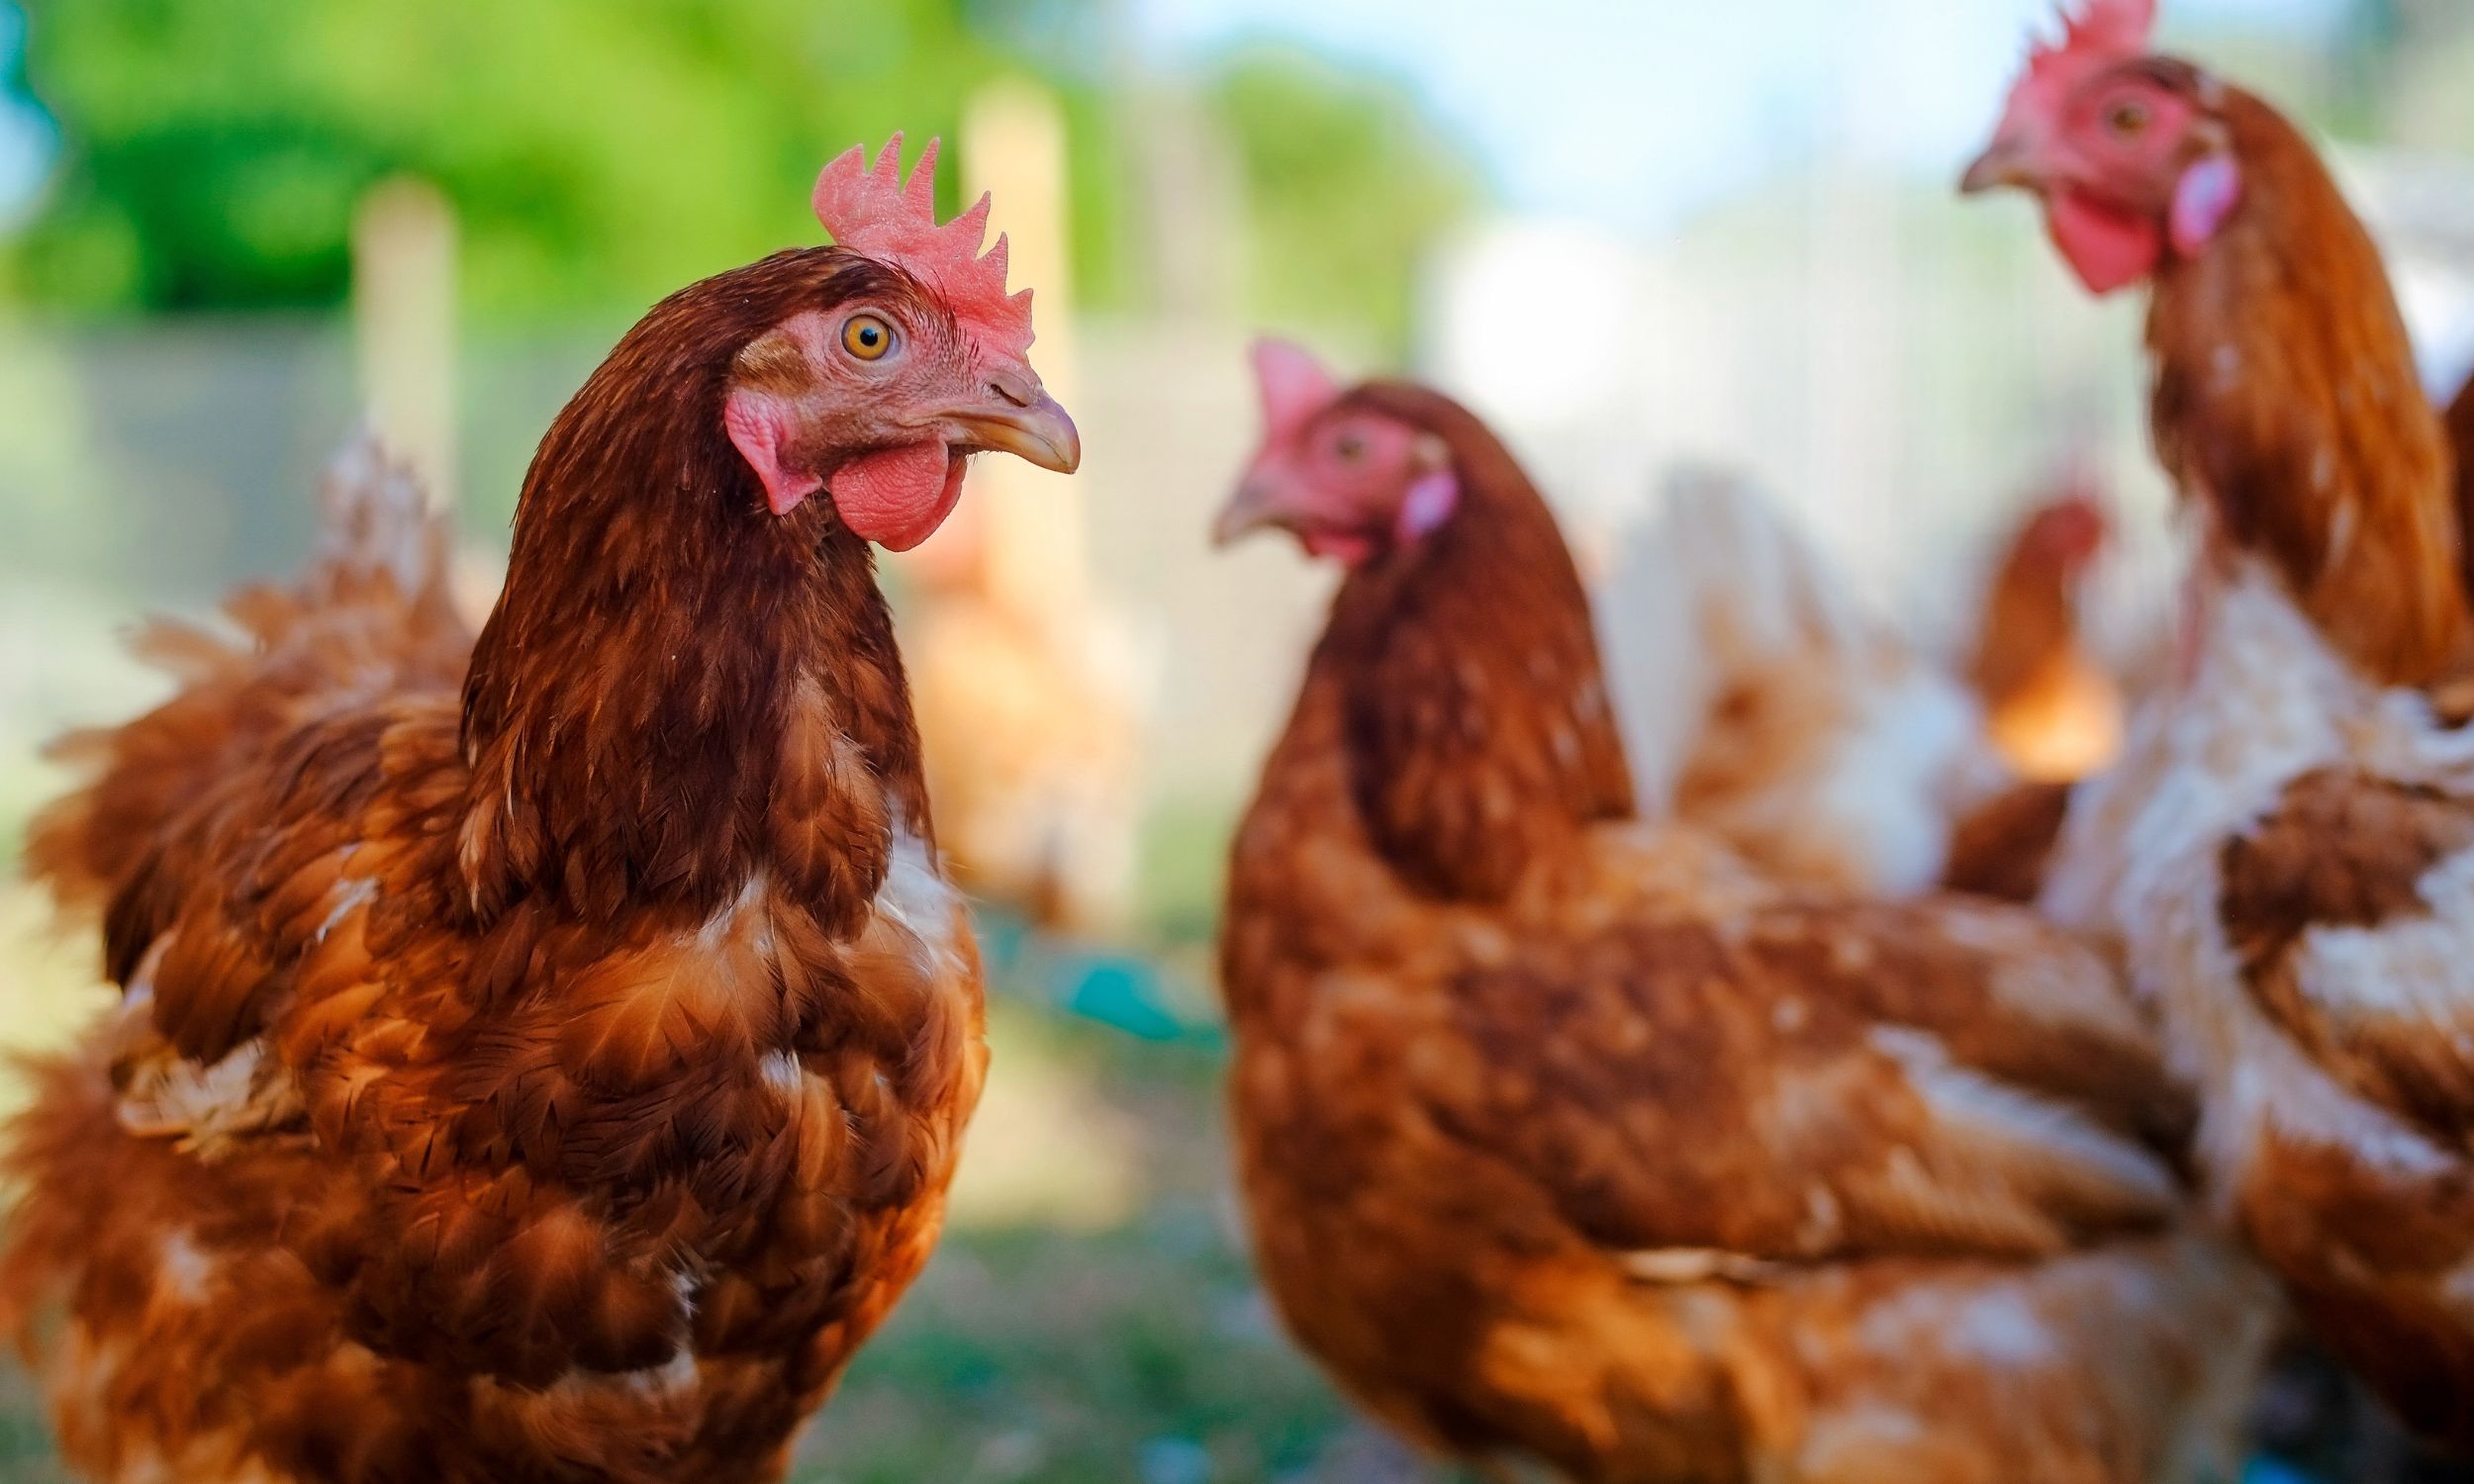 Chickens in a permaculture design